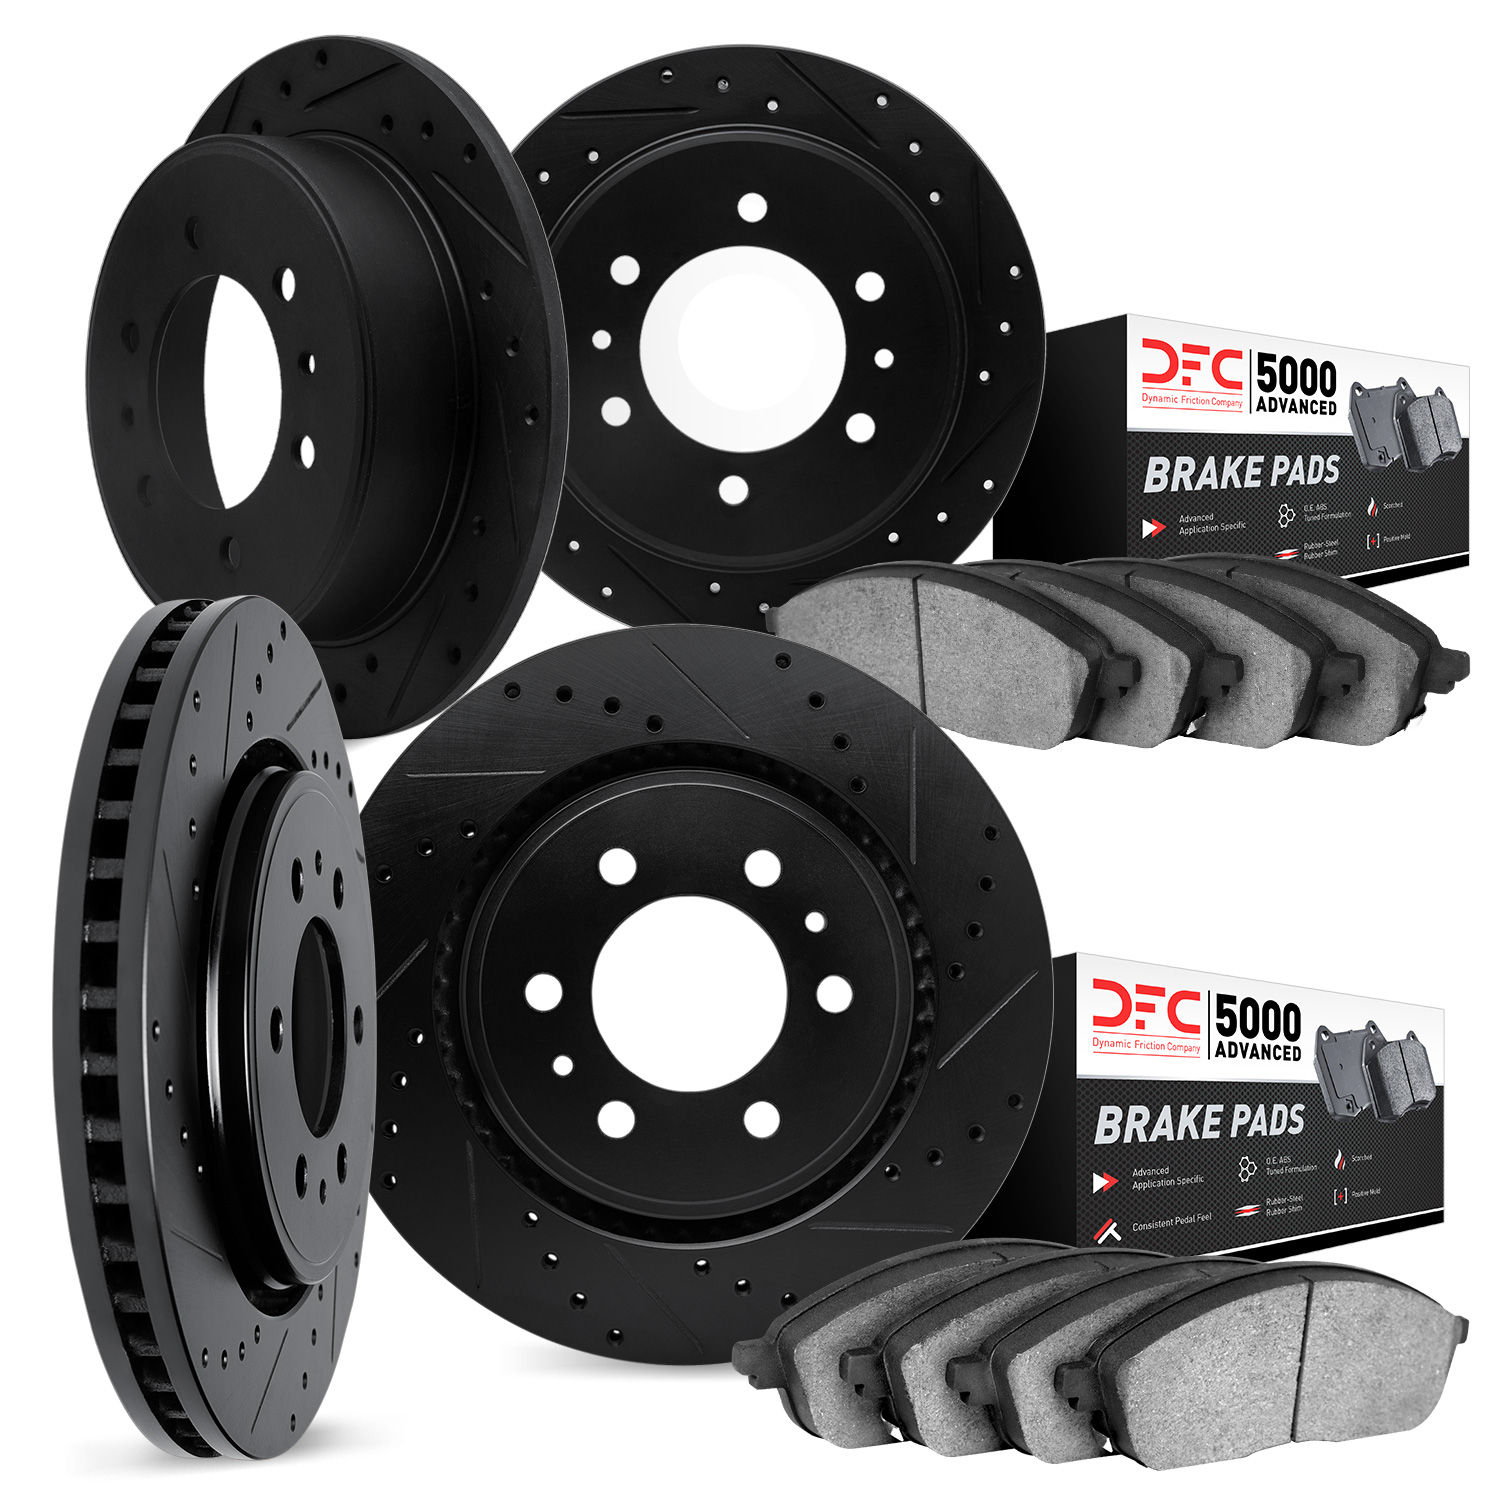 8504-37006 Drilled/Slotted Brake Rotors w/5000 Advanced Brake Pads Kit [Black], 1988-1995 GM, Position: Front and Rear